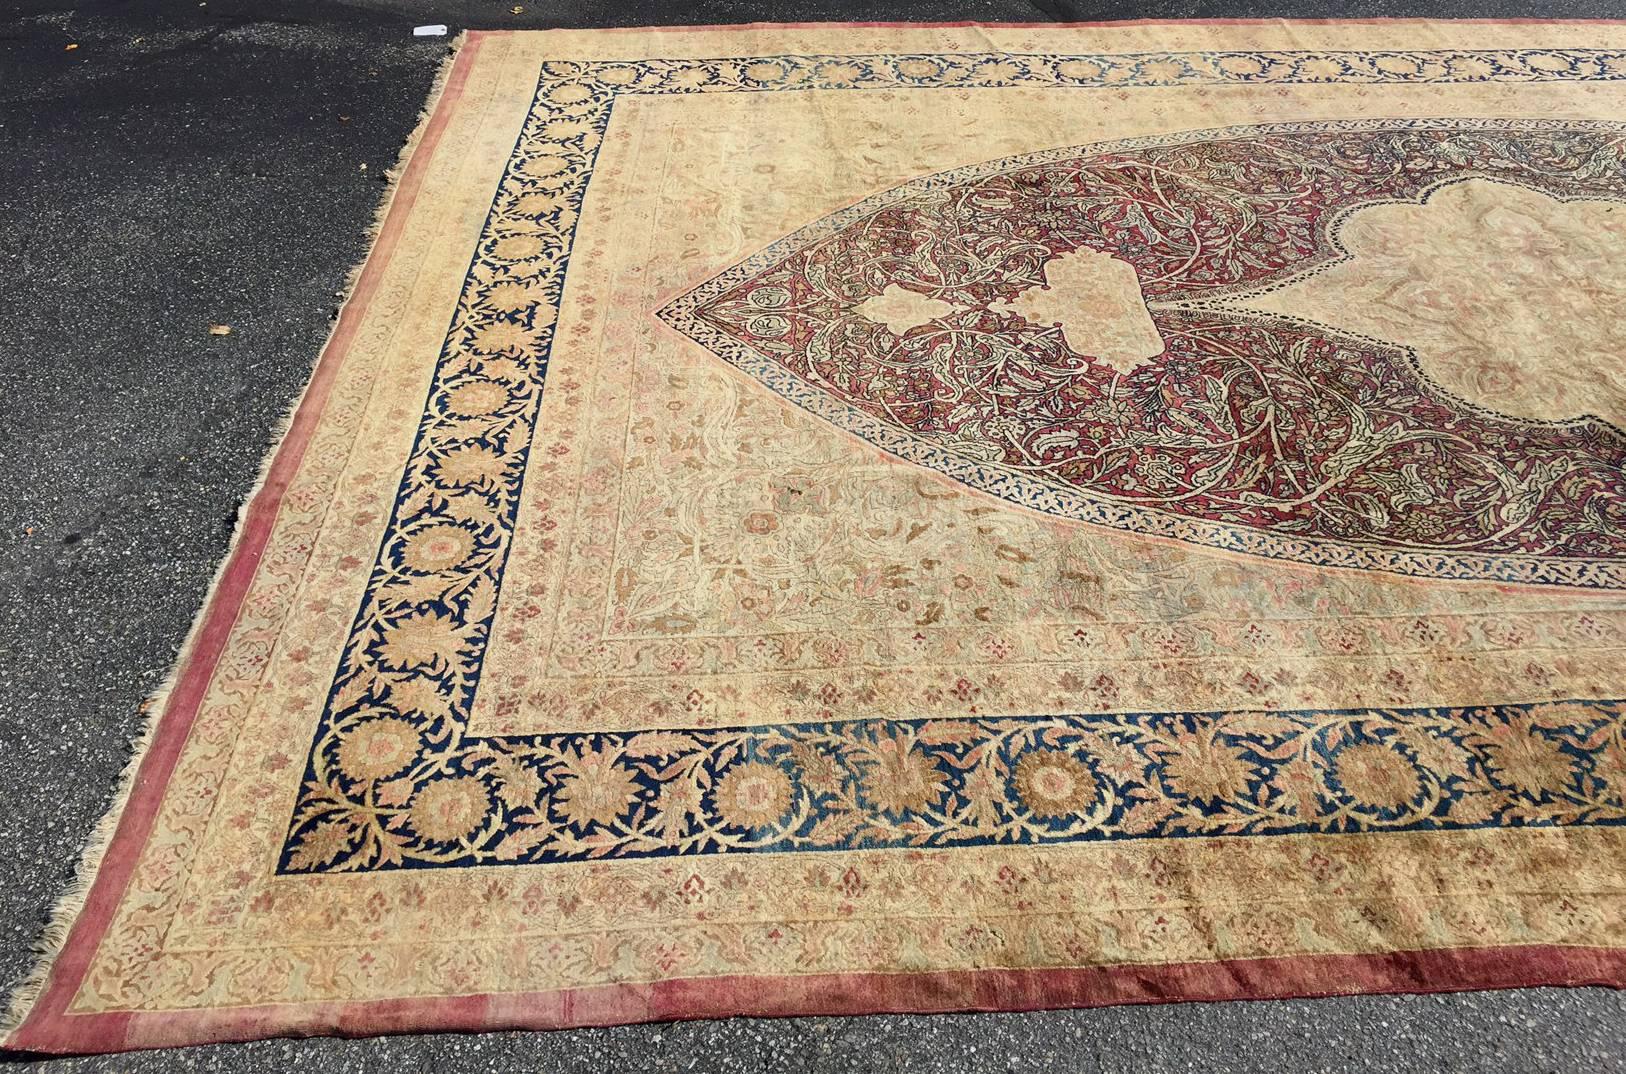 A fine example of an early 20th century large Imperial Royal Kerman handwoven rug with maroon oval center medallion with geometric center design on a sand or camel field with navy blue decorative border and muted red or pink outer border. These